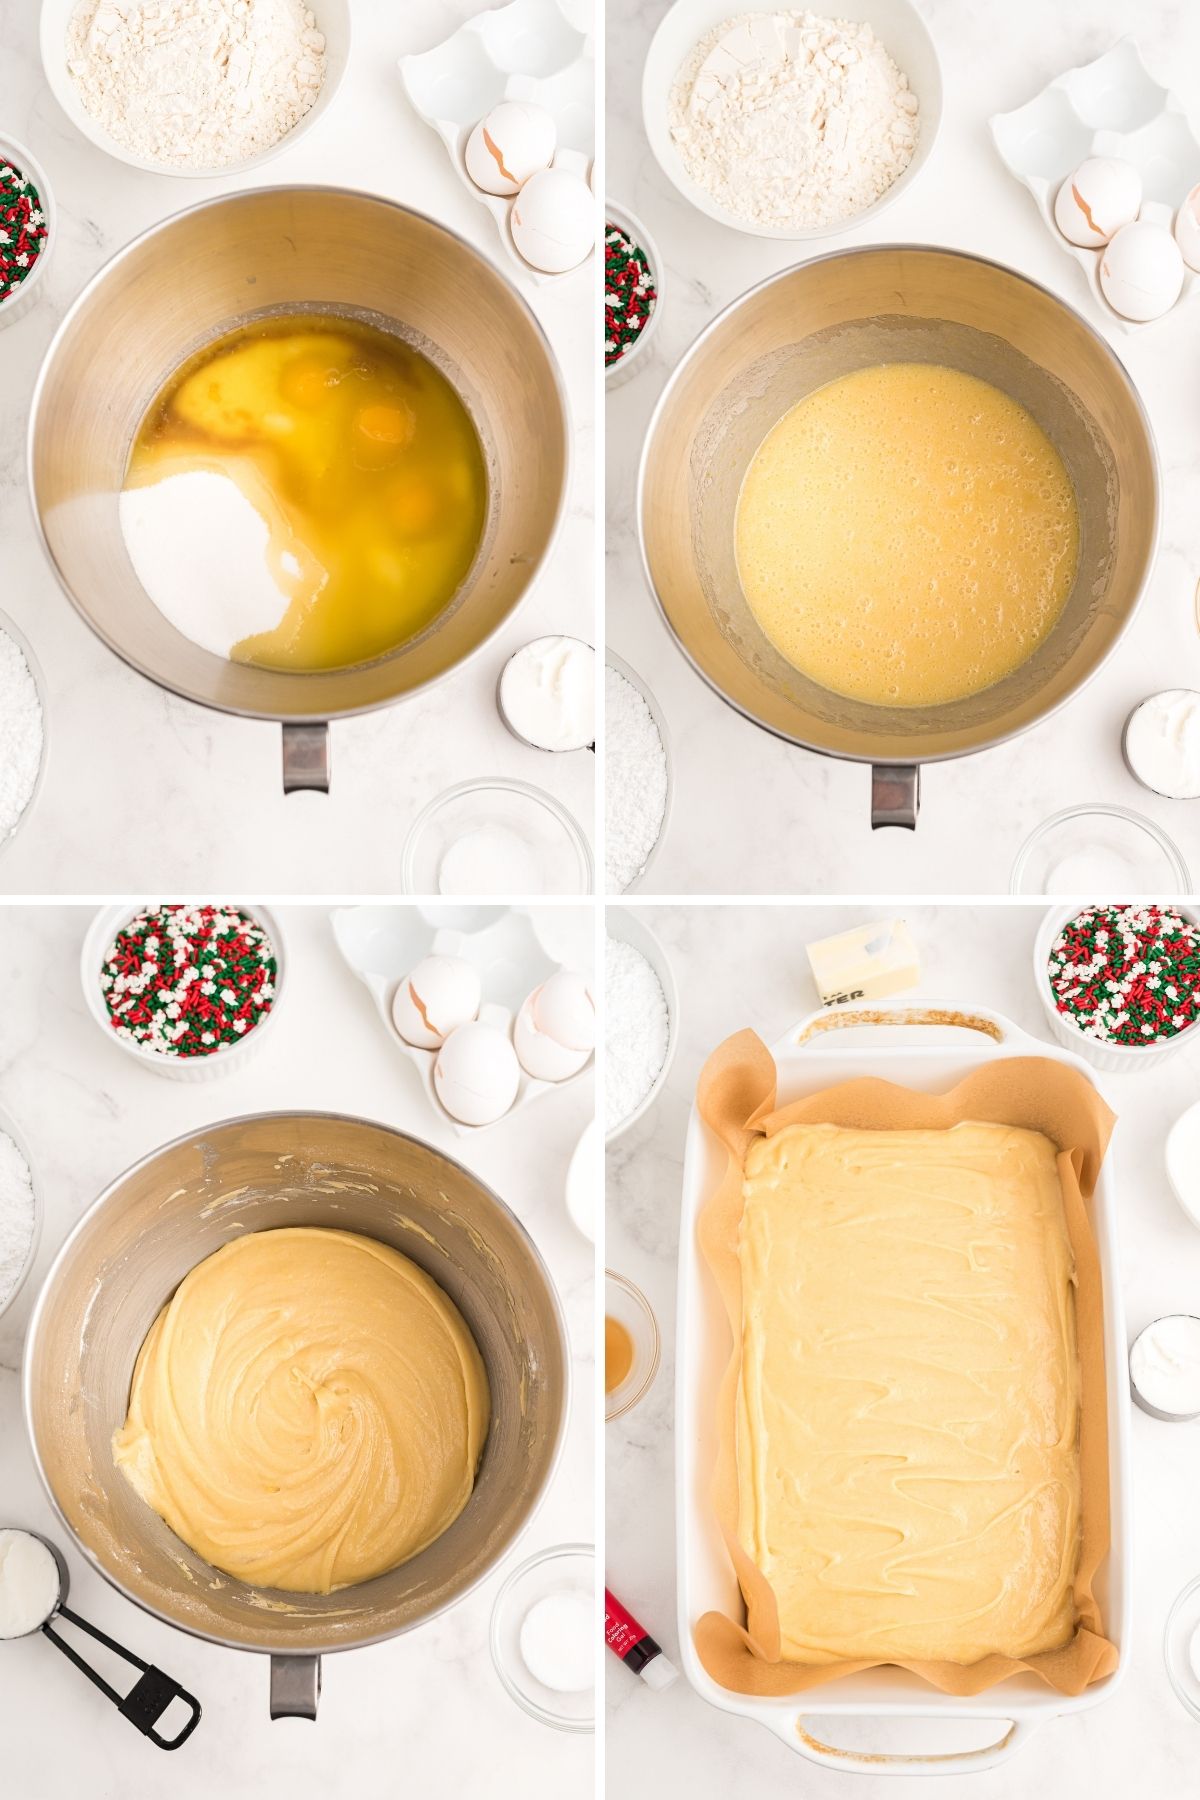 four photos: mixing bowl with wet ingredients; bowl stirred together; thick batter in mixing bowl; batter in bottom of 9x13 dish lined with parchment paper